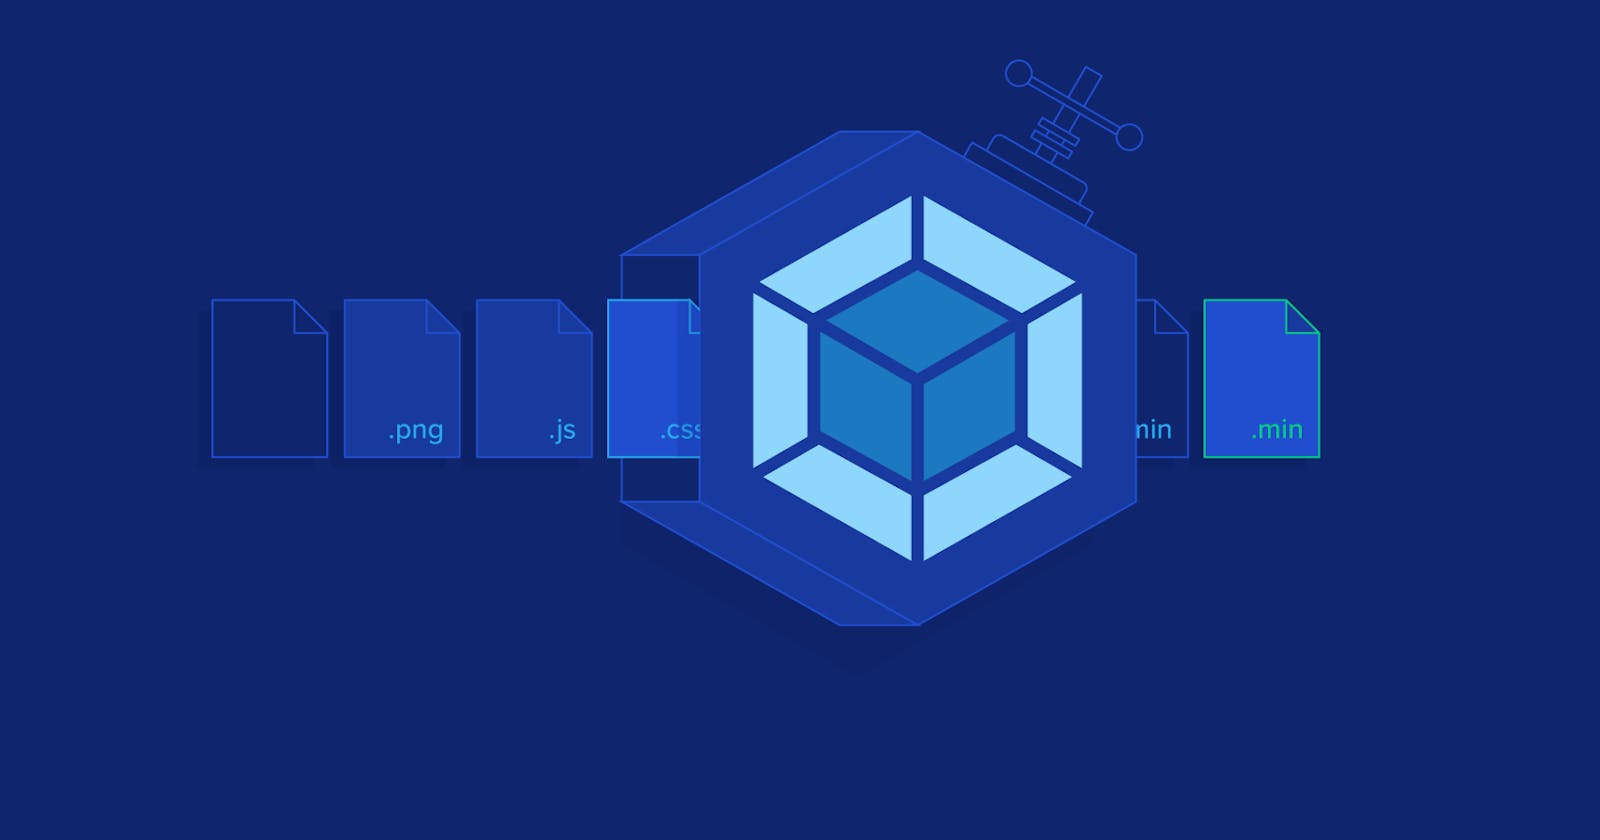 The Beginner's Guide to Webpack - Javascript with and without Webpack.